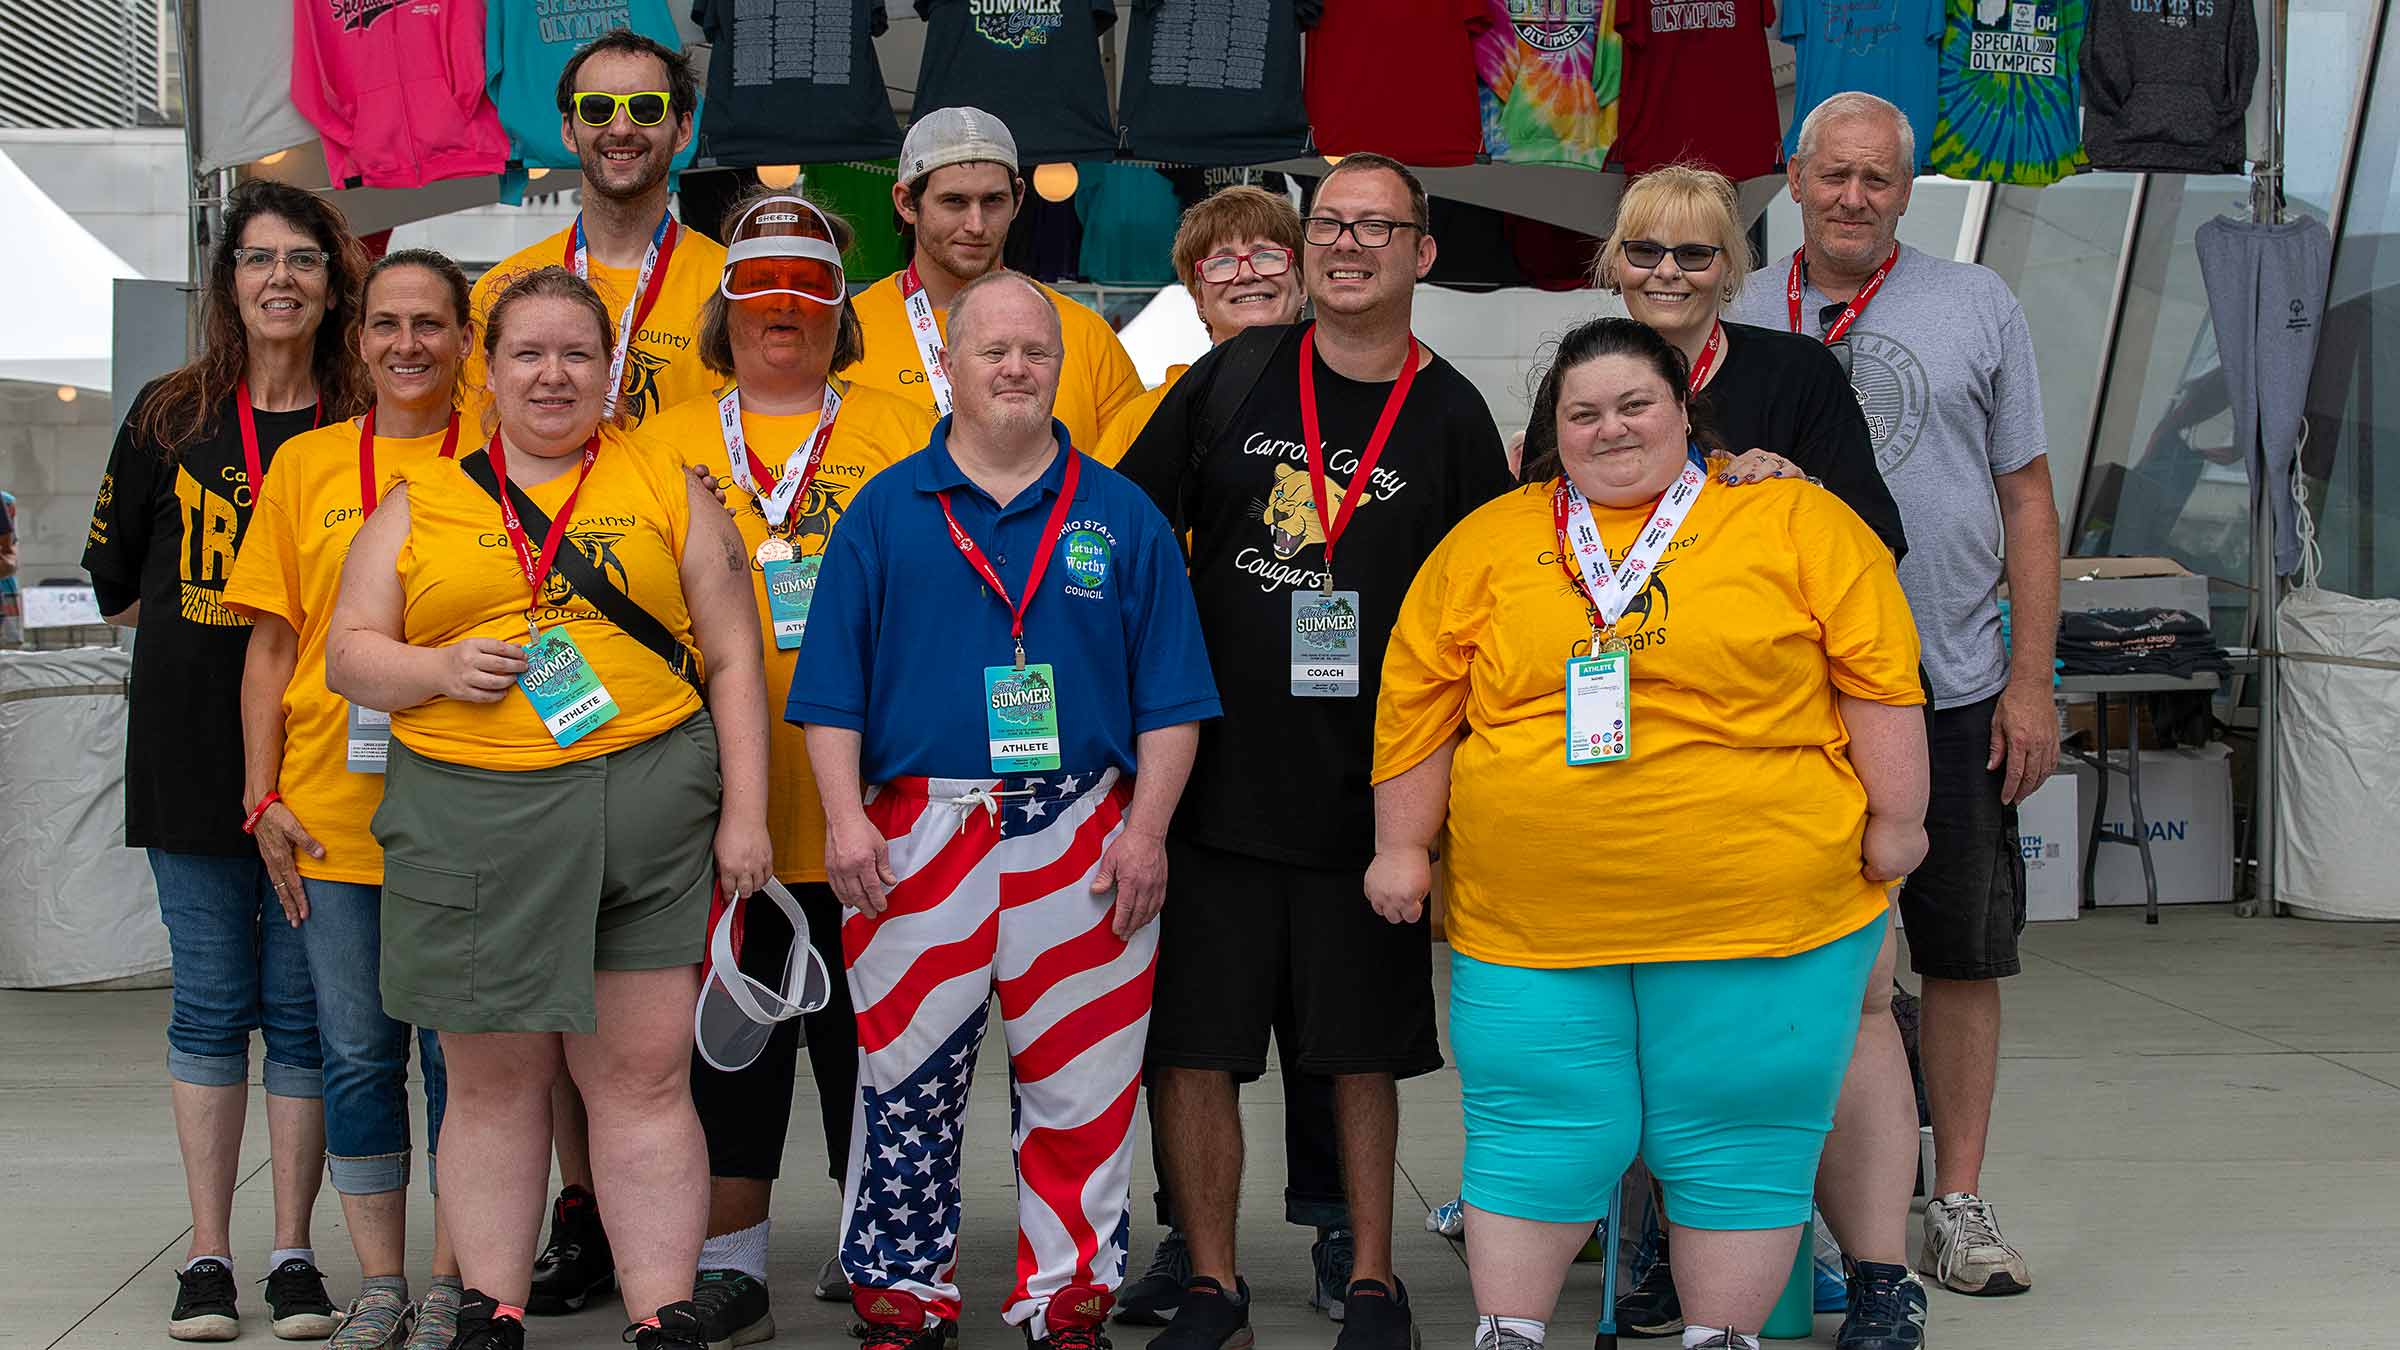 Group shot of the Special Olympics team